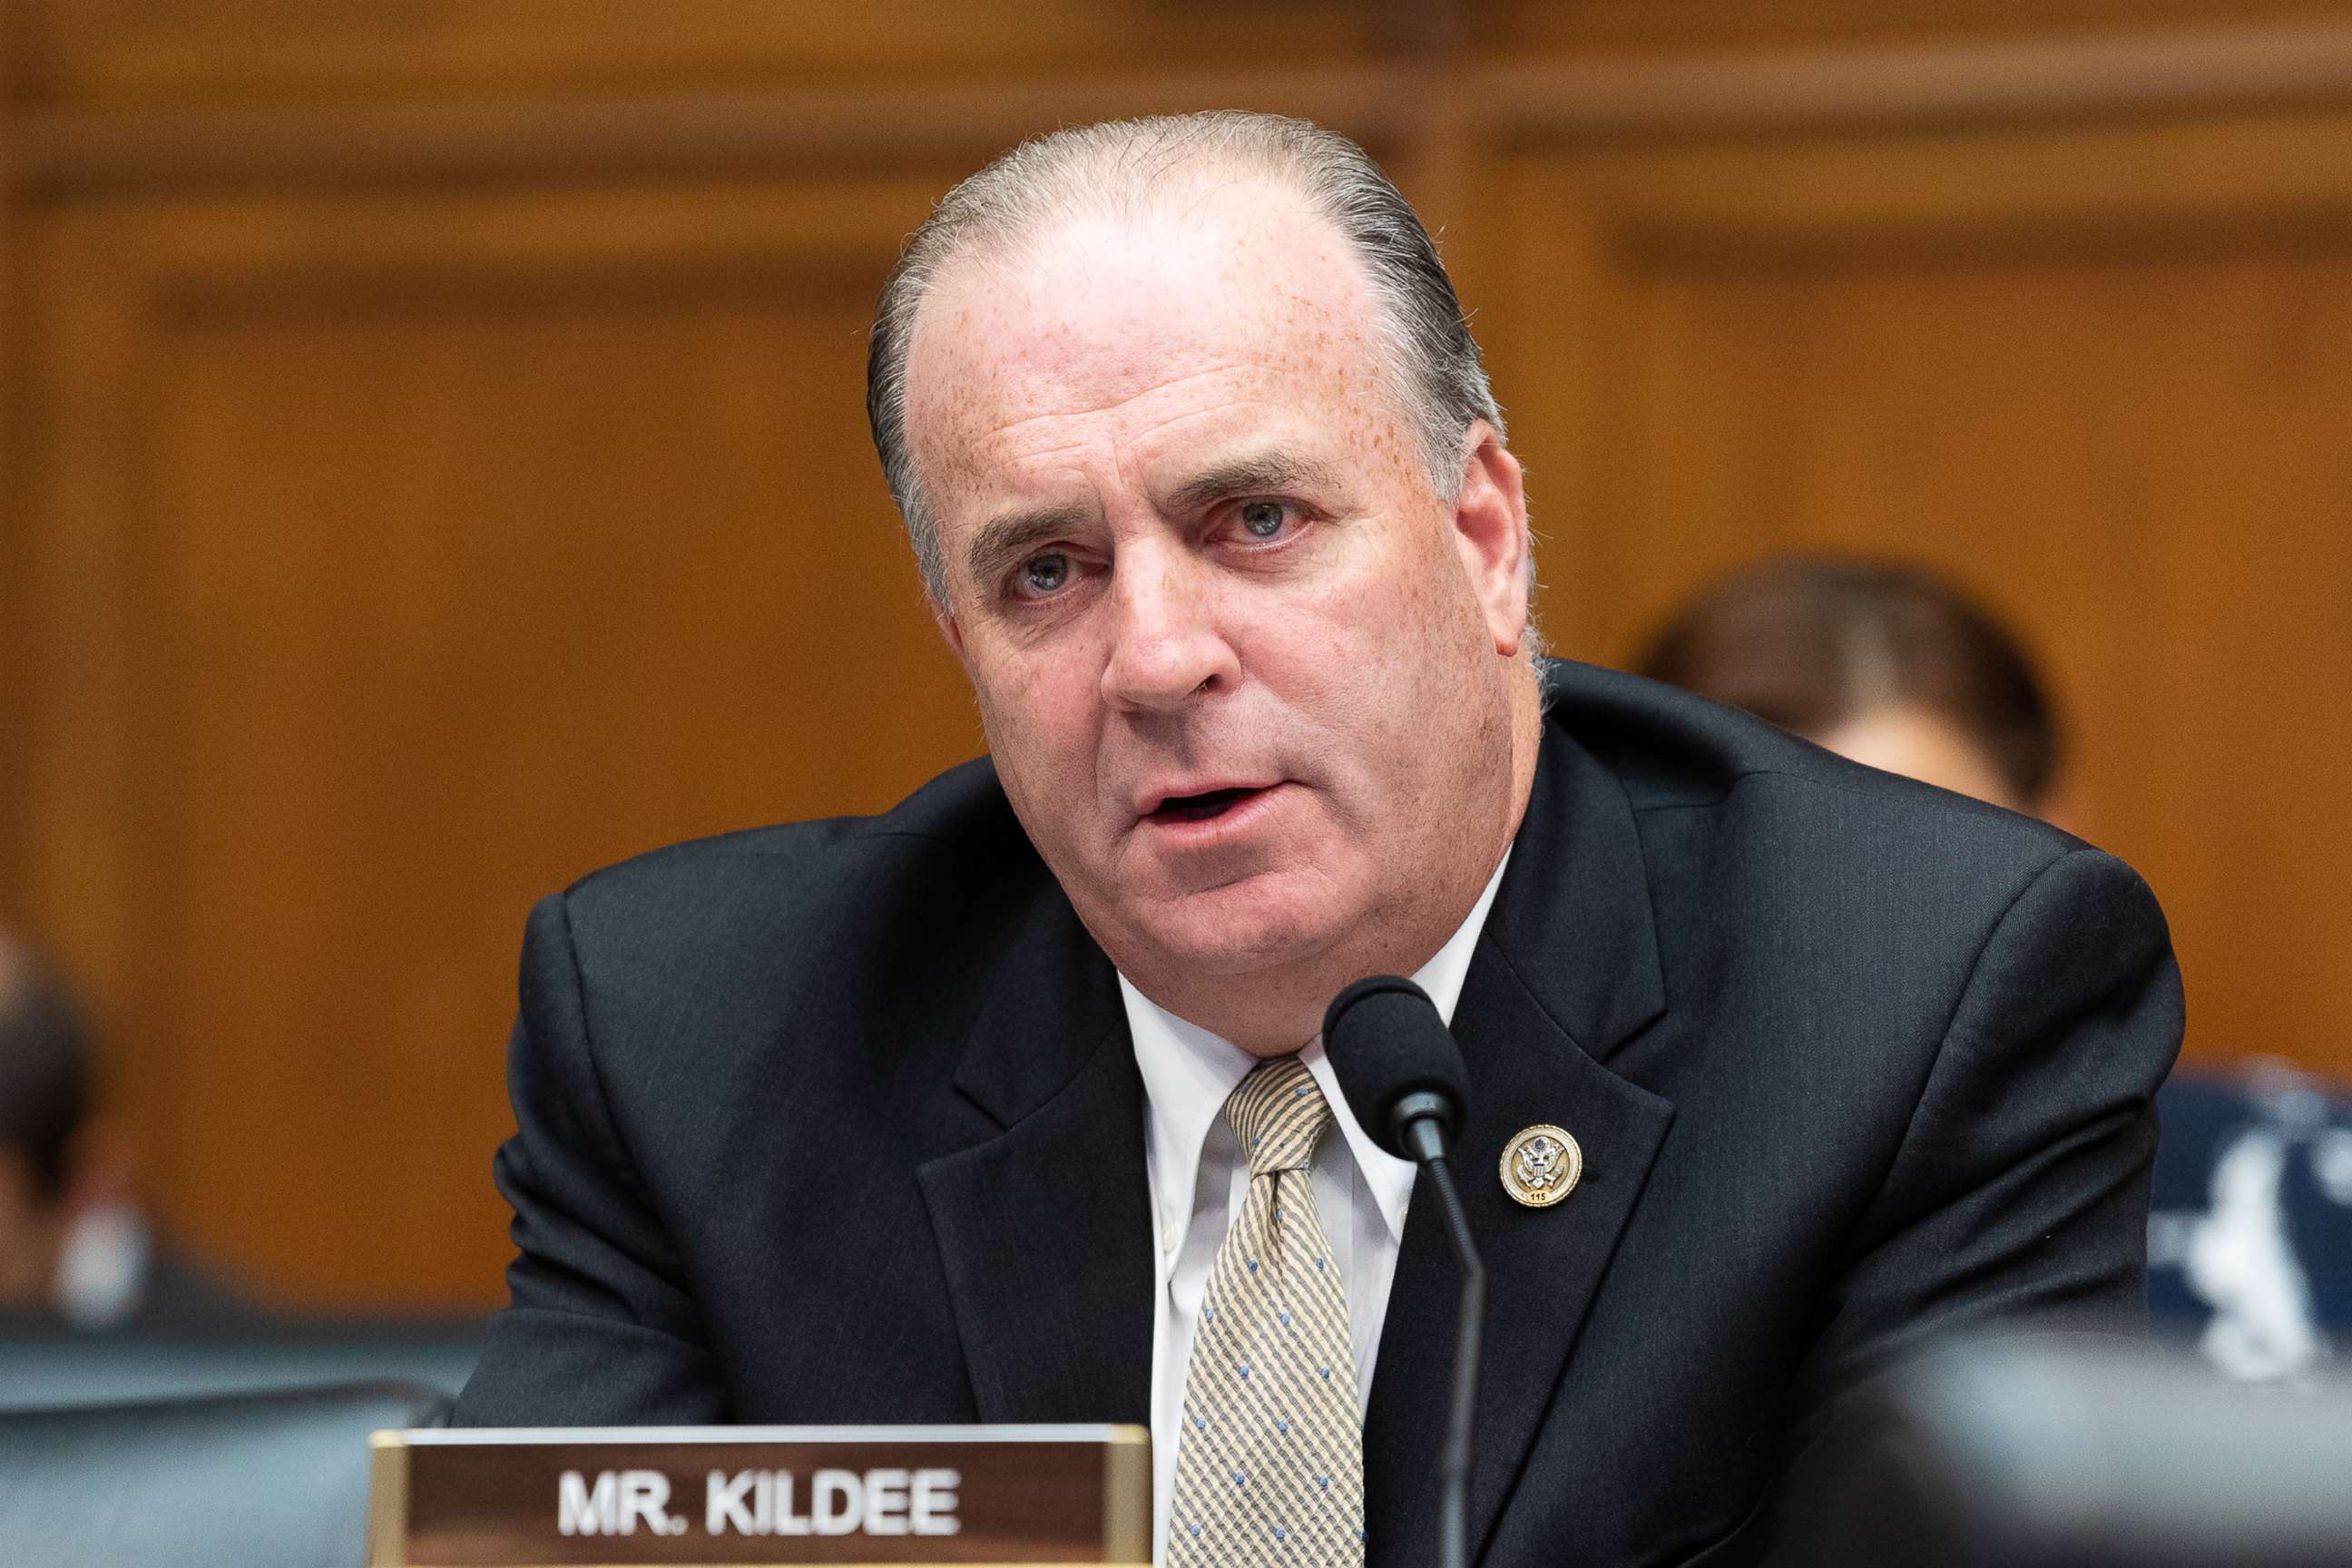 PHOTO: U.S. Representative Dan Kildee at a hearing of the House Financial Services Committee on Capital Hill, June 27, 2018.